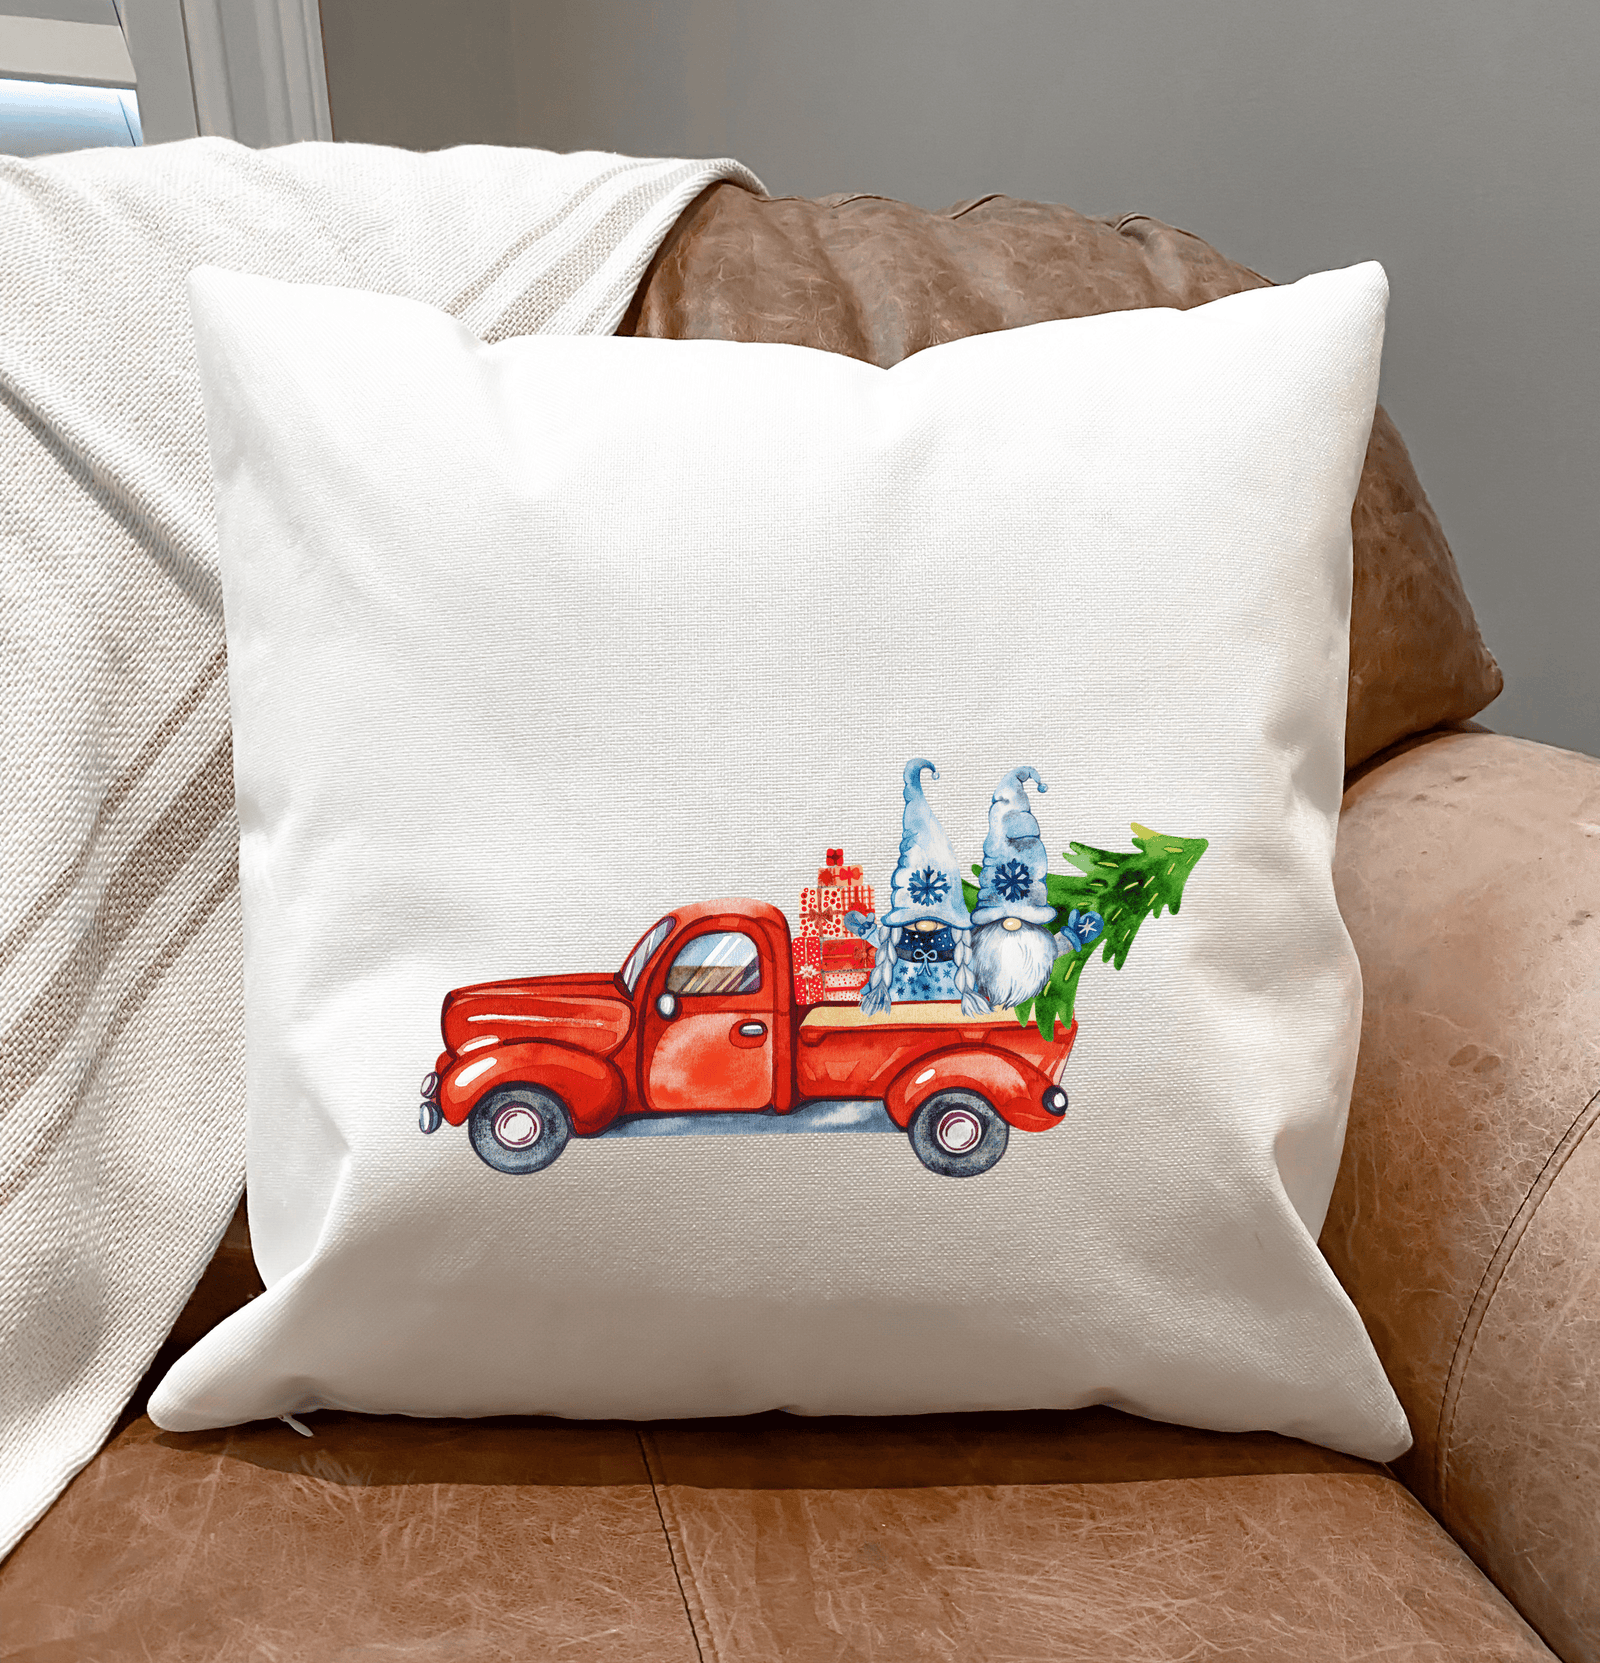 White 2-Gnomes A Red Truck & A Tree Fabric Pillow Cover for Christmas Decor